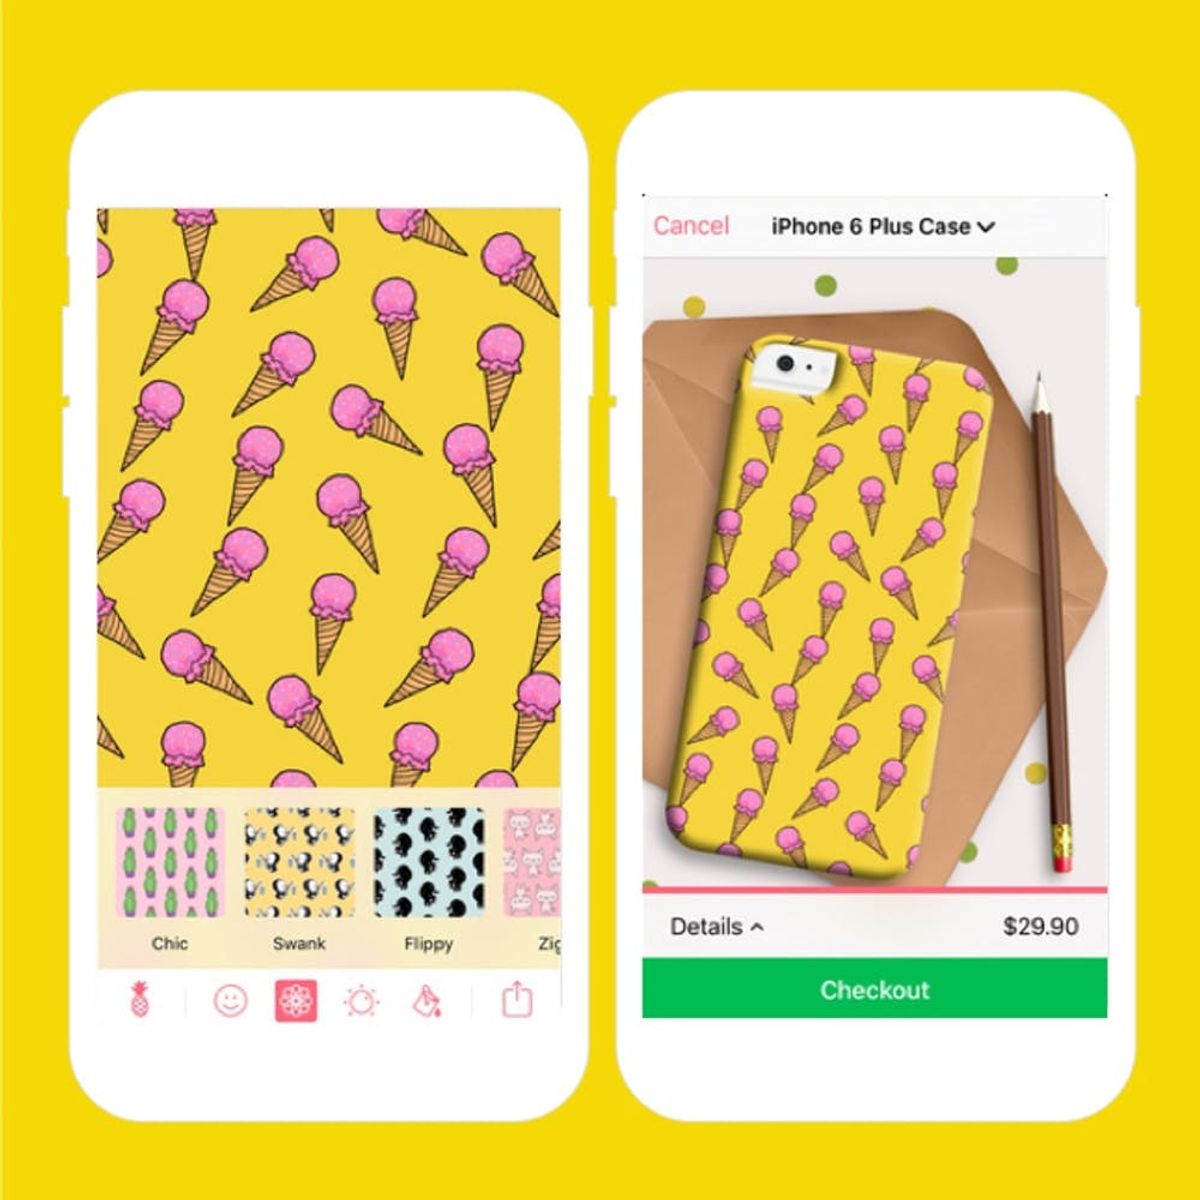 5 Best Apps of the Week: An App That Lets You Design Your Own Phone Case + More!